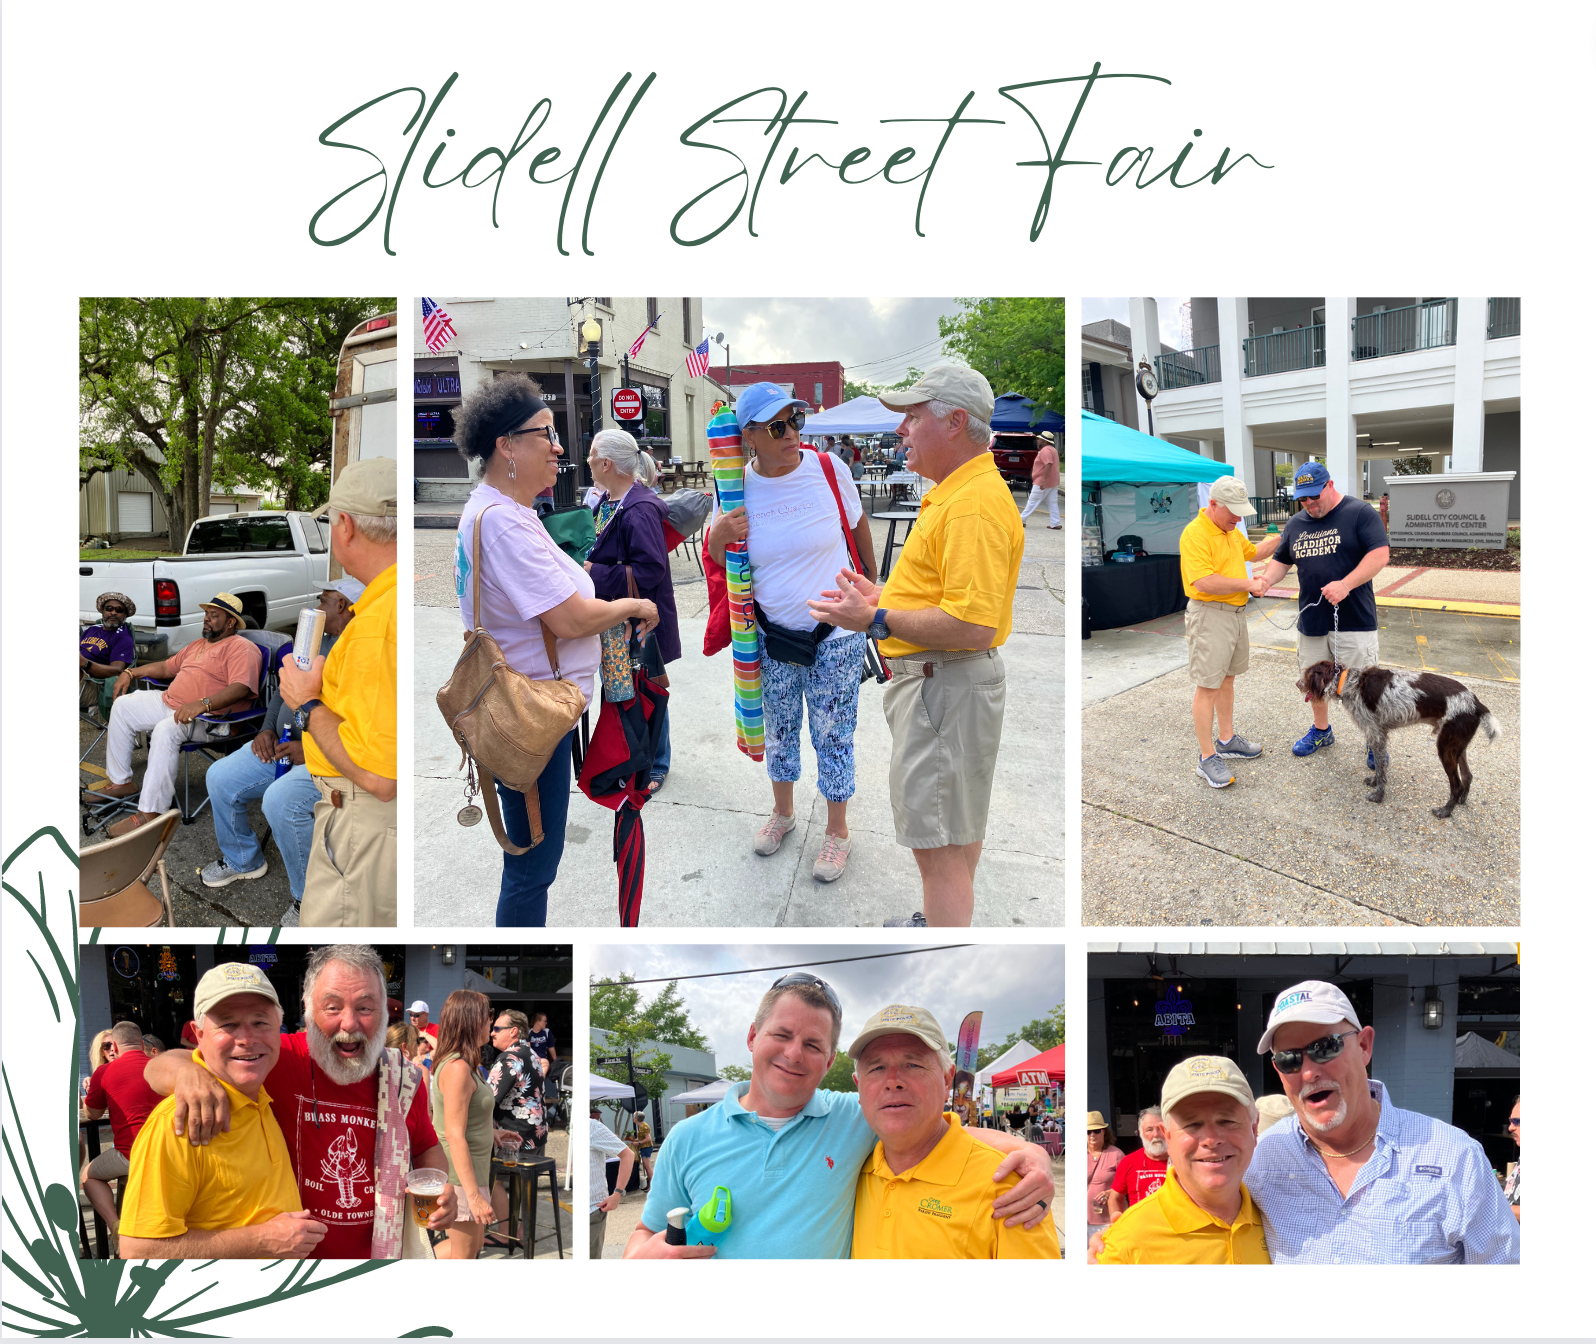 I had a wonderful time at the Slidell Street Fair this weekend! We had great food, beautifully handmade items from local vendors, music, crawfish, and so much more!